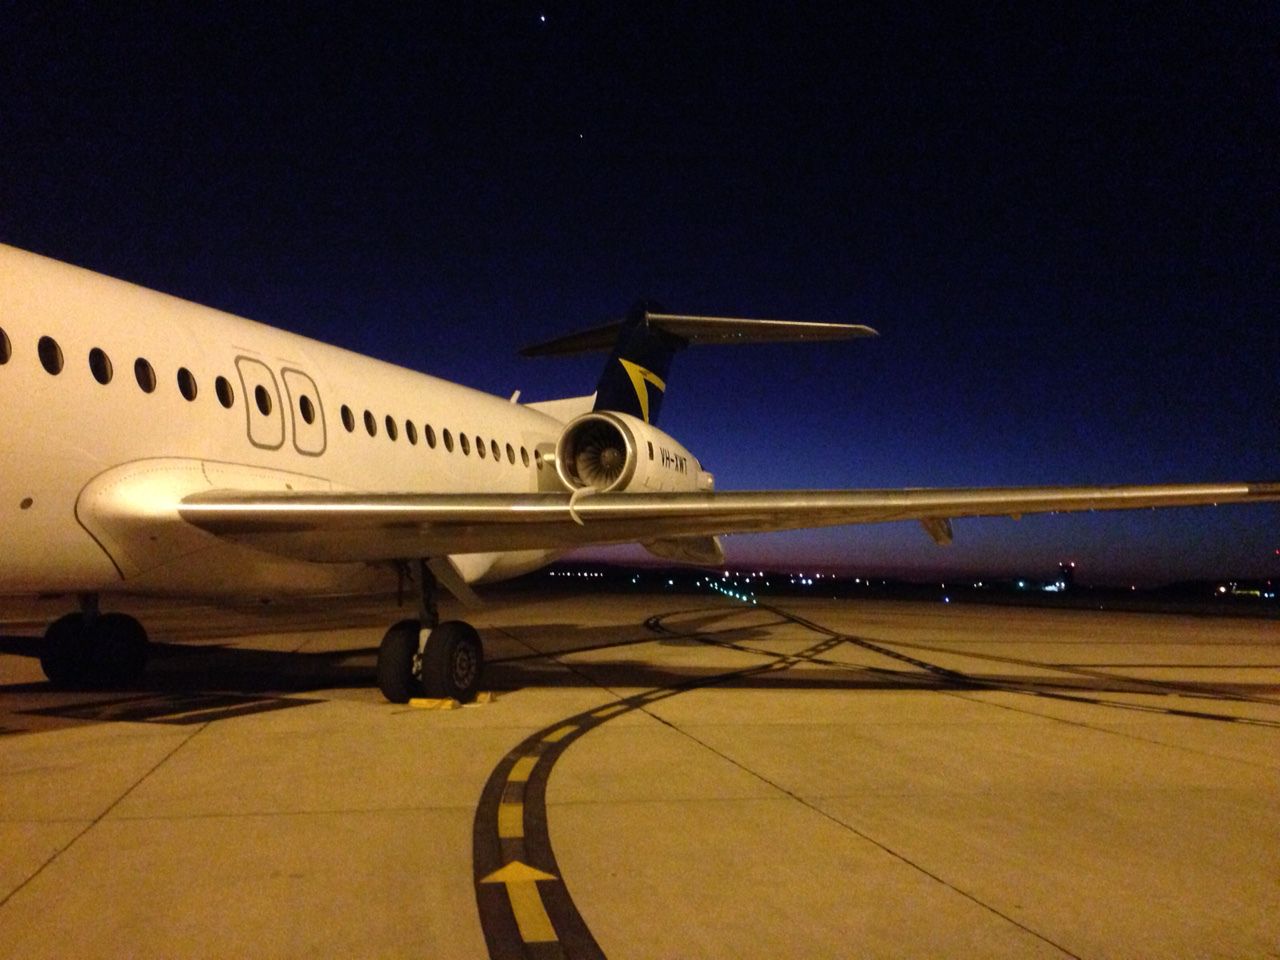 alliance airlines aircraft on the ground